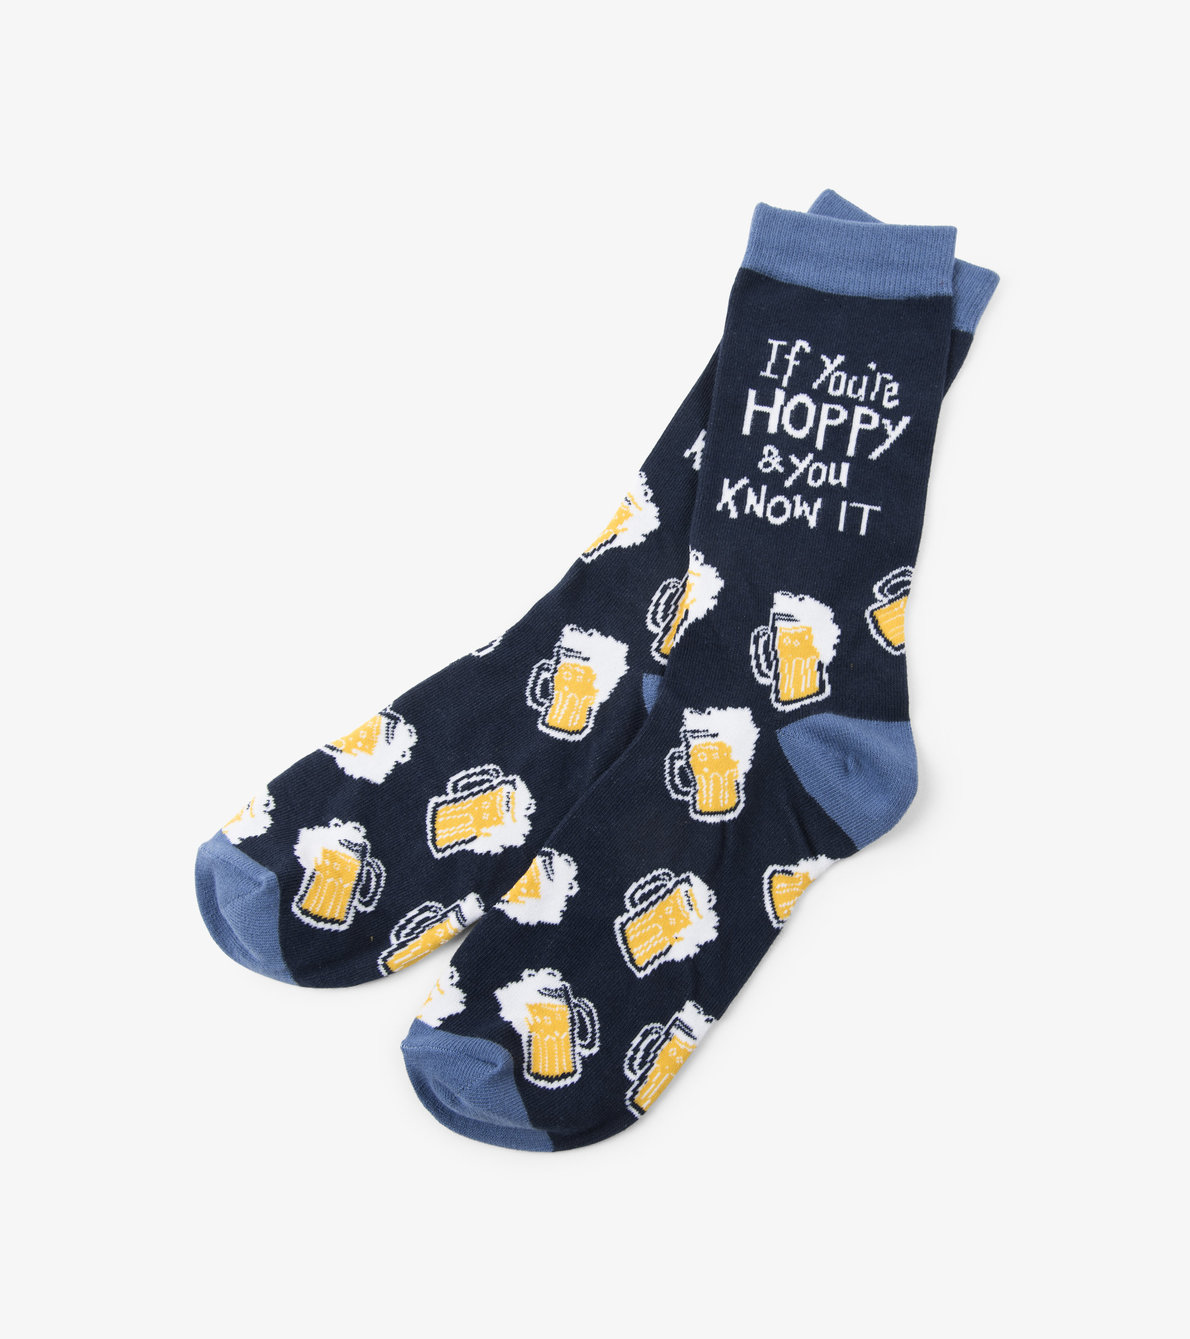 View larger image of If You're Hoppy And You Know it Men's Crew Socks